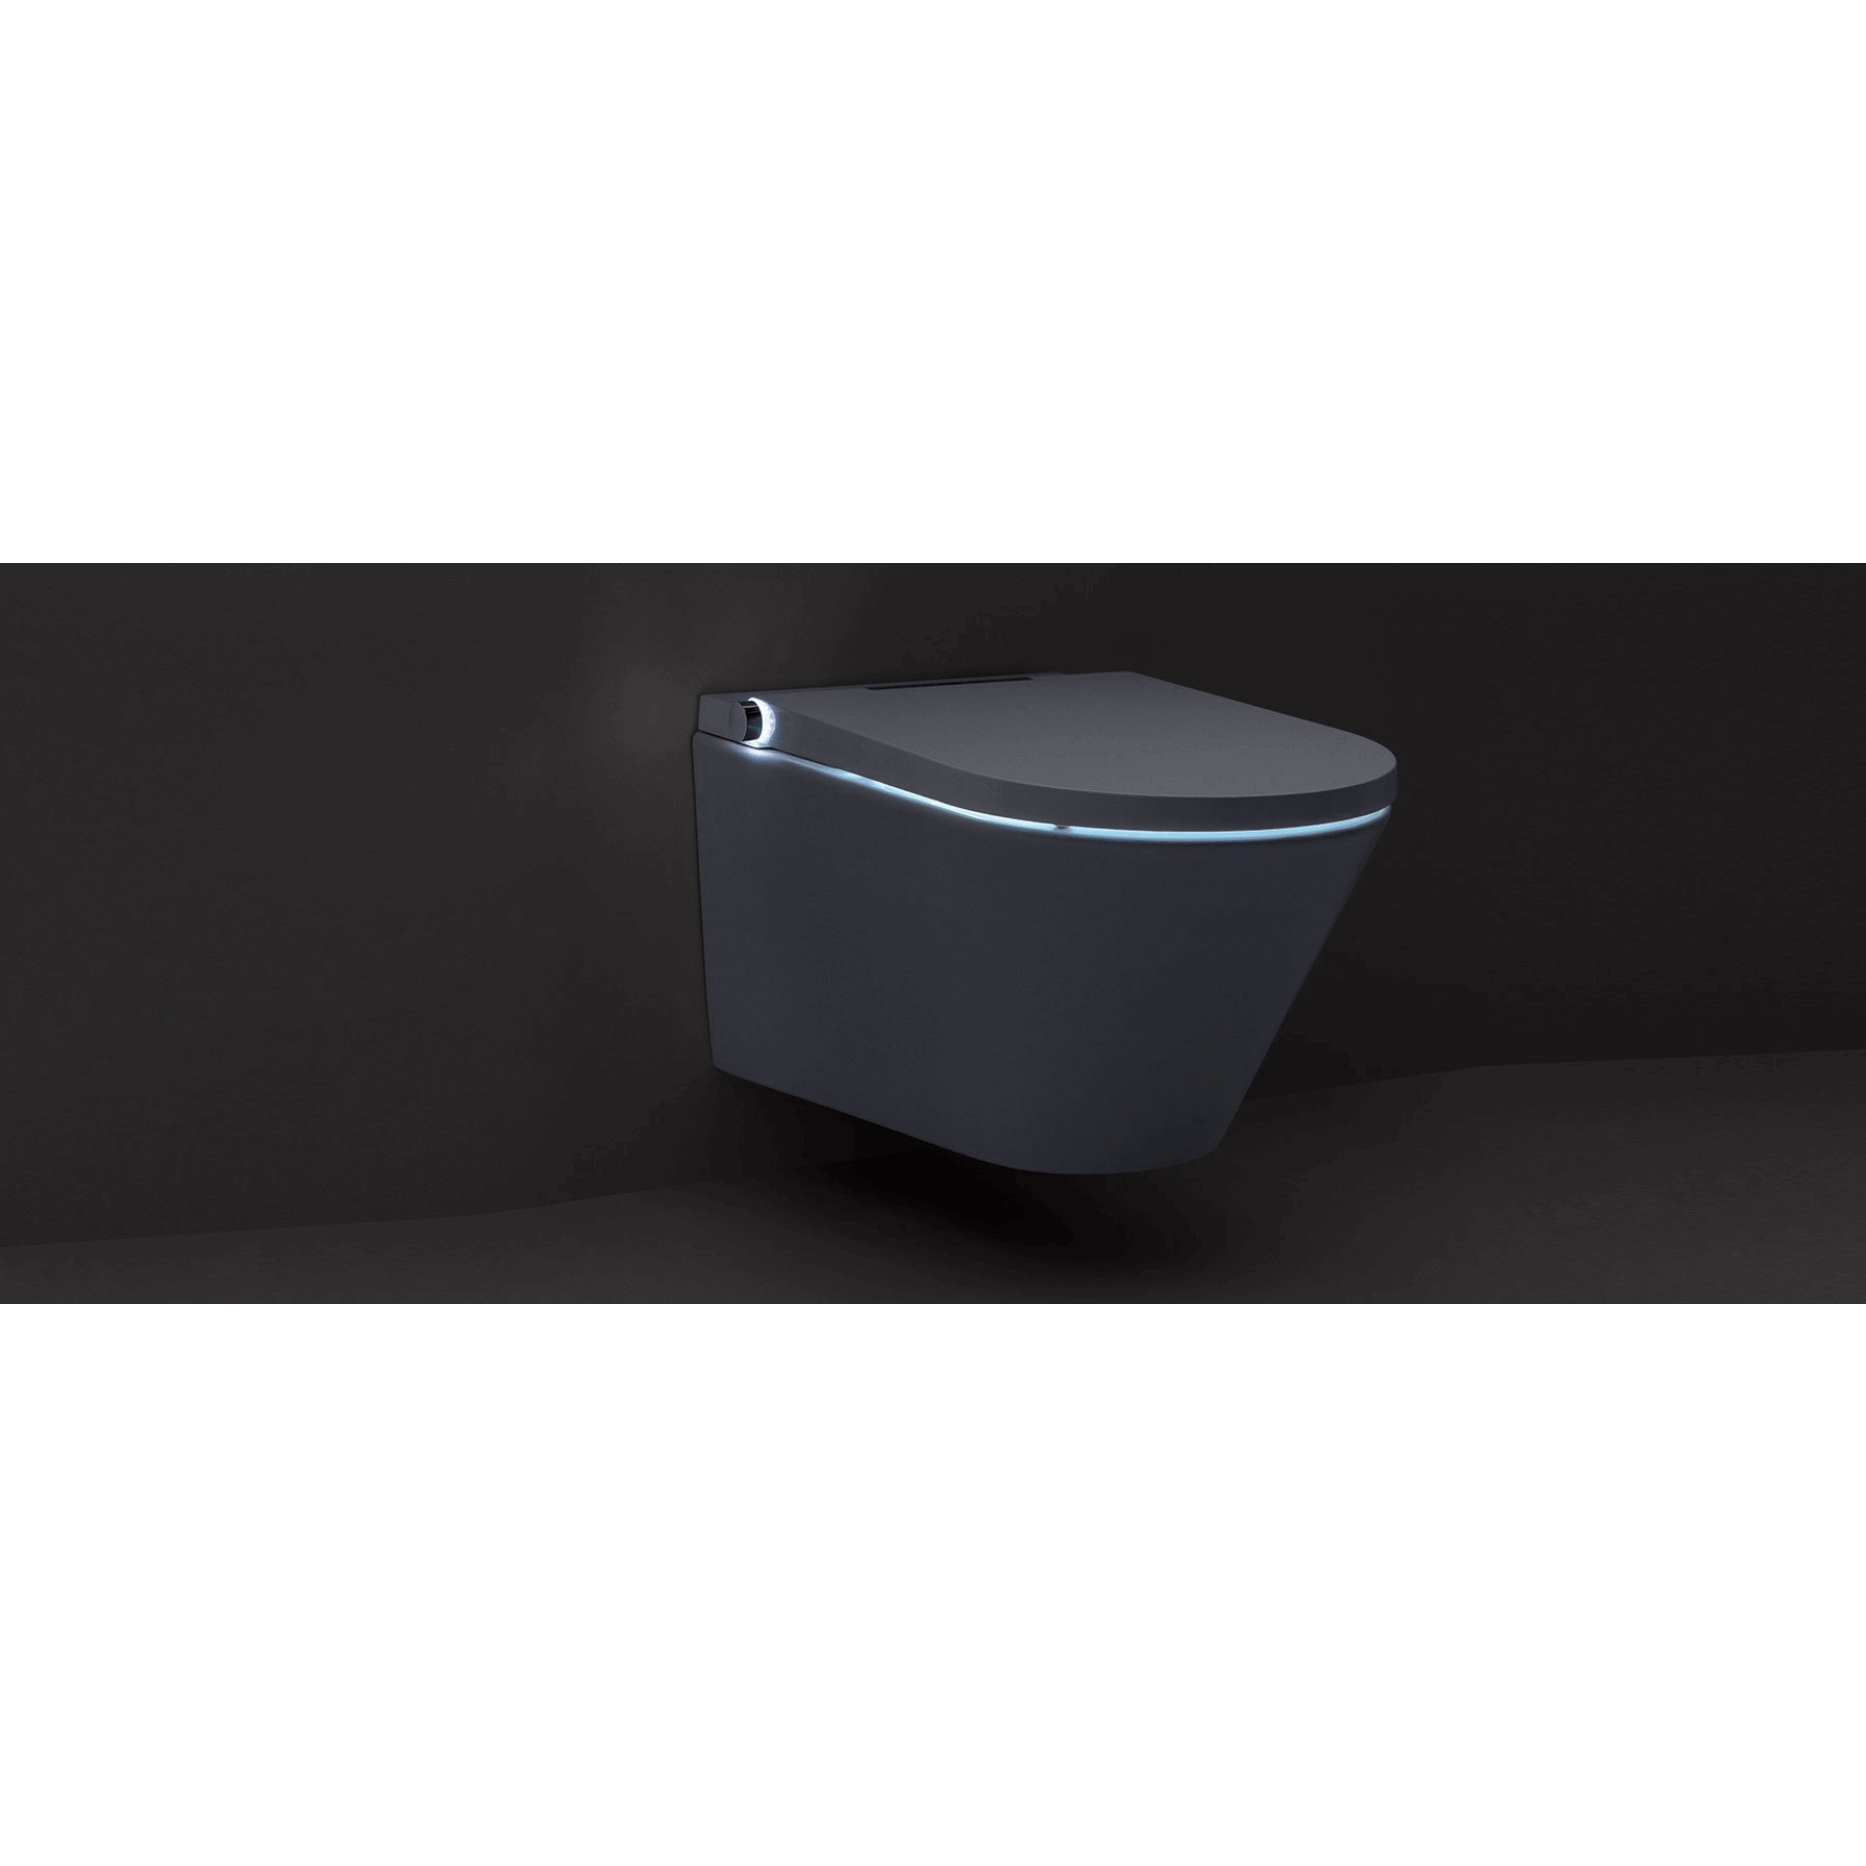 AXENT One Plus Wall Hung Intelligent Toilet - view of night light in darkness